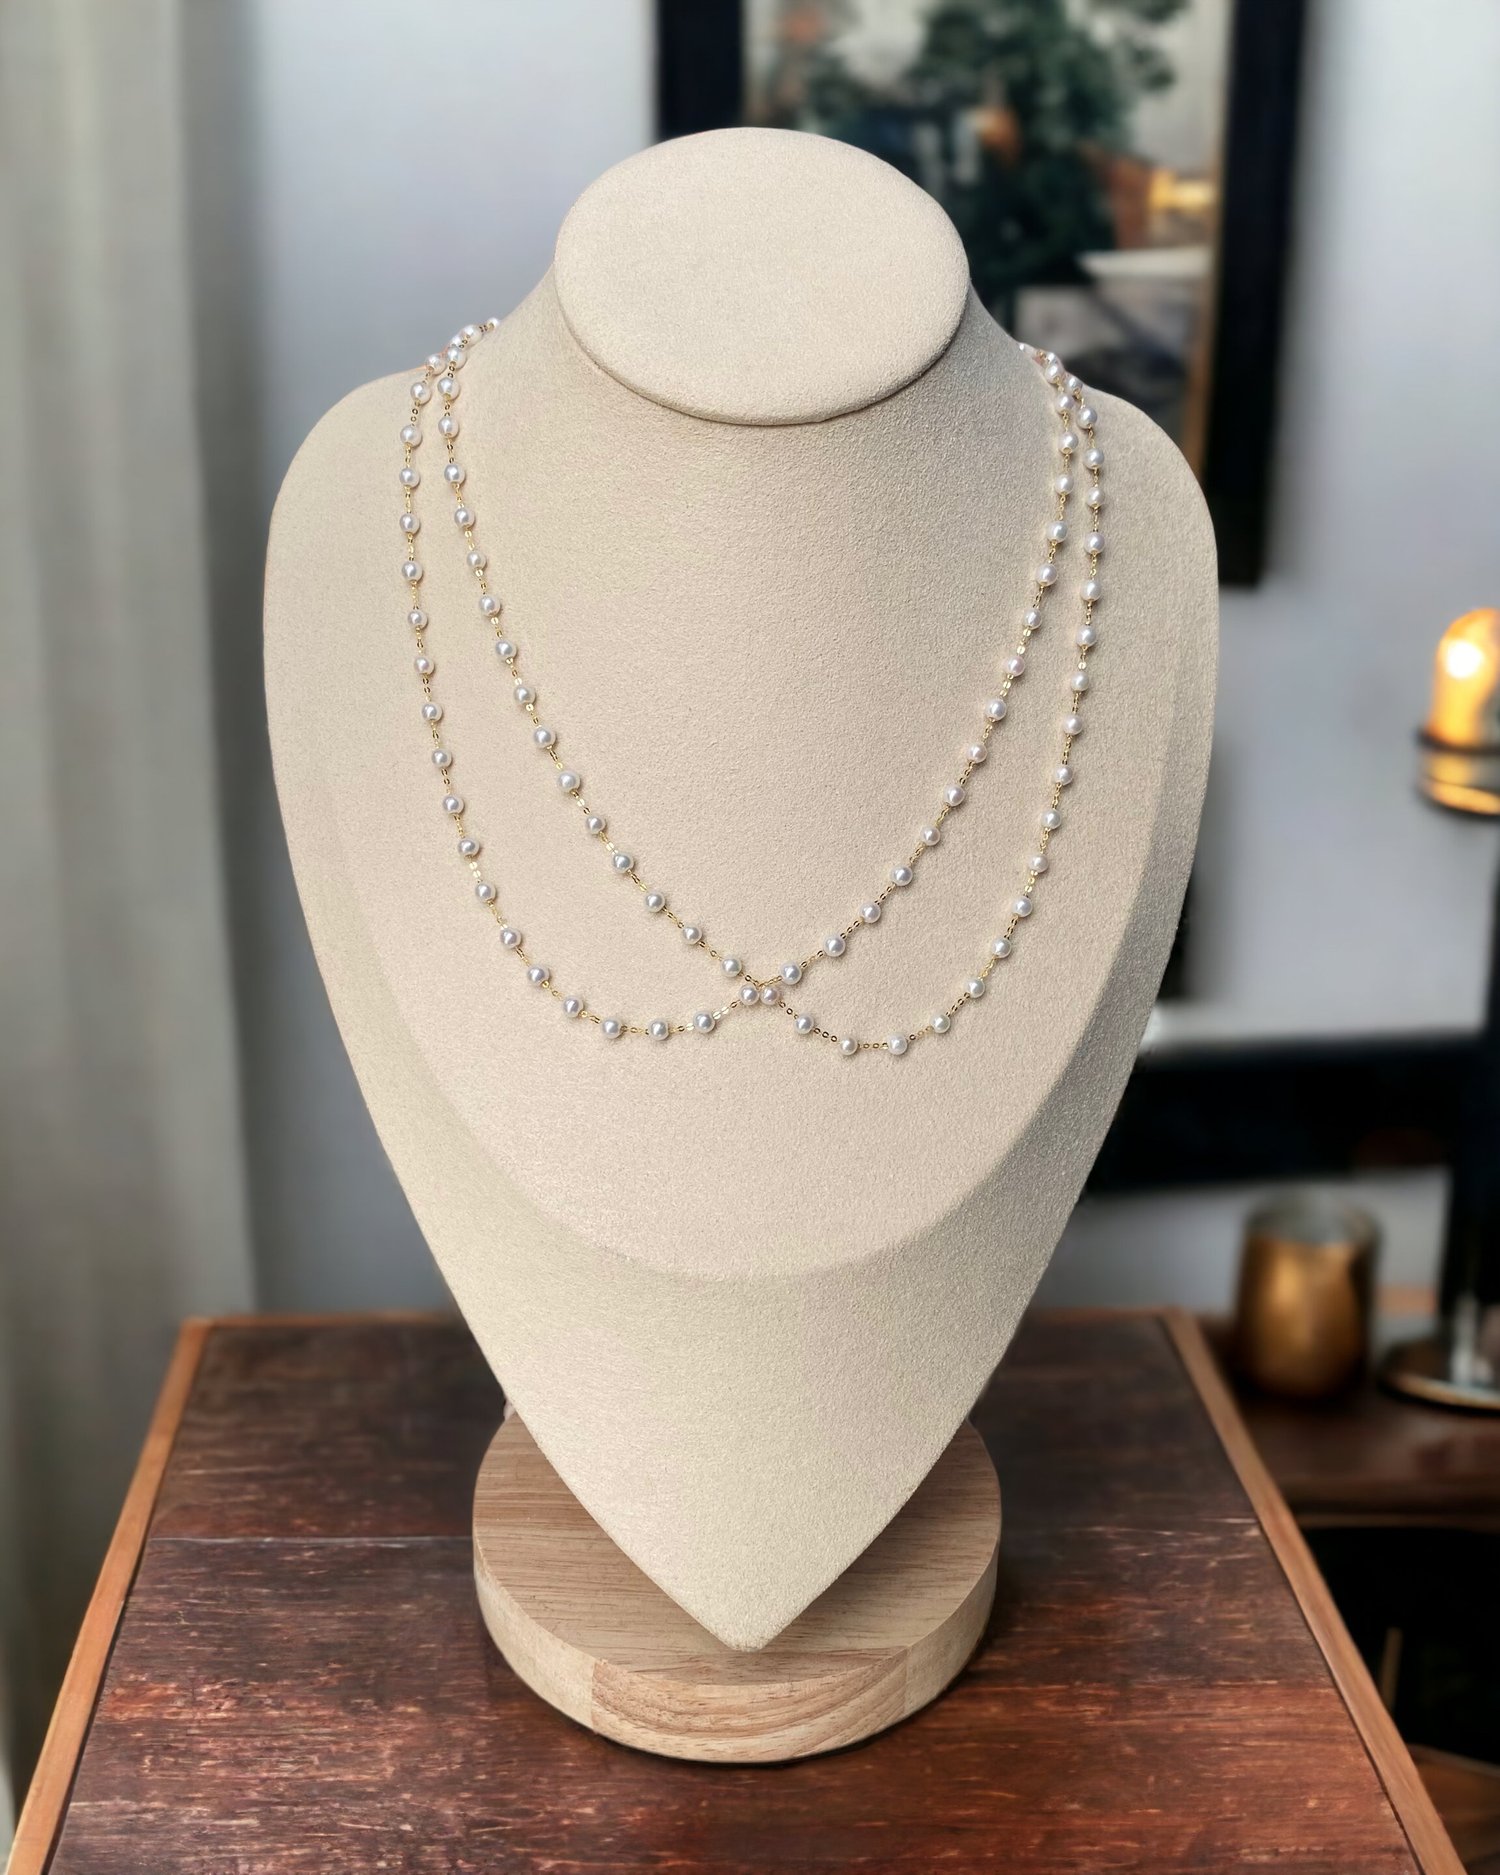 White Pearl Strand Necklace Women: 8mm/10mm Ivory Pearl Chain Wedding Jewelry with Dainty Silver Clasp for Bride Bridemaid - Trendy Accessory for